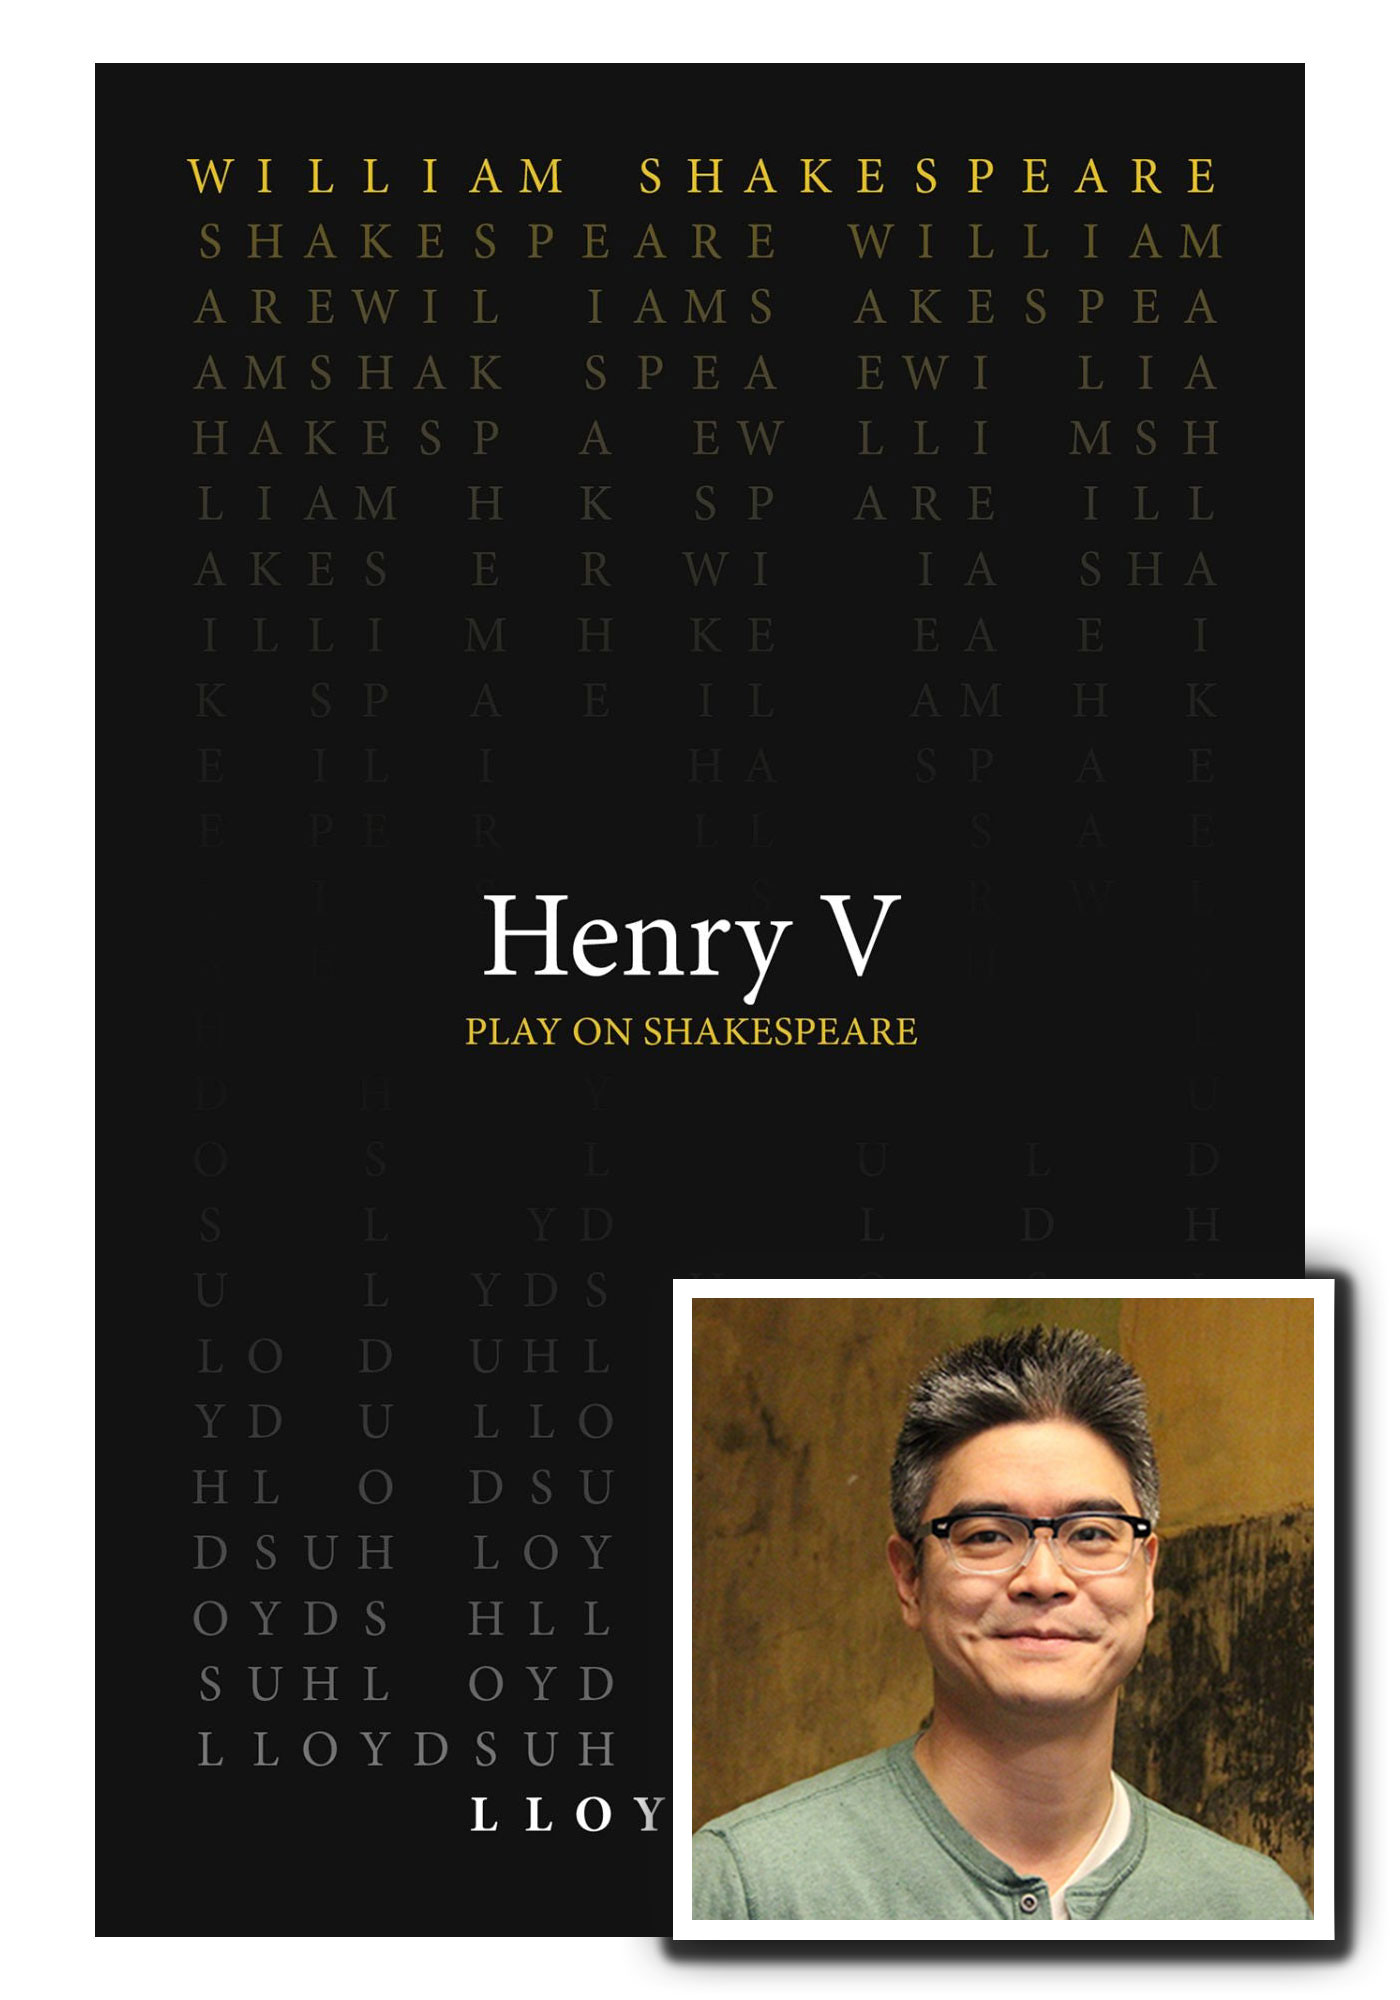 Henry V, book cover from ACMRS Press